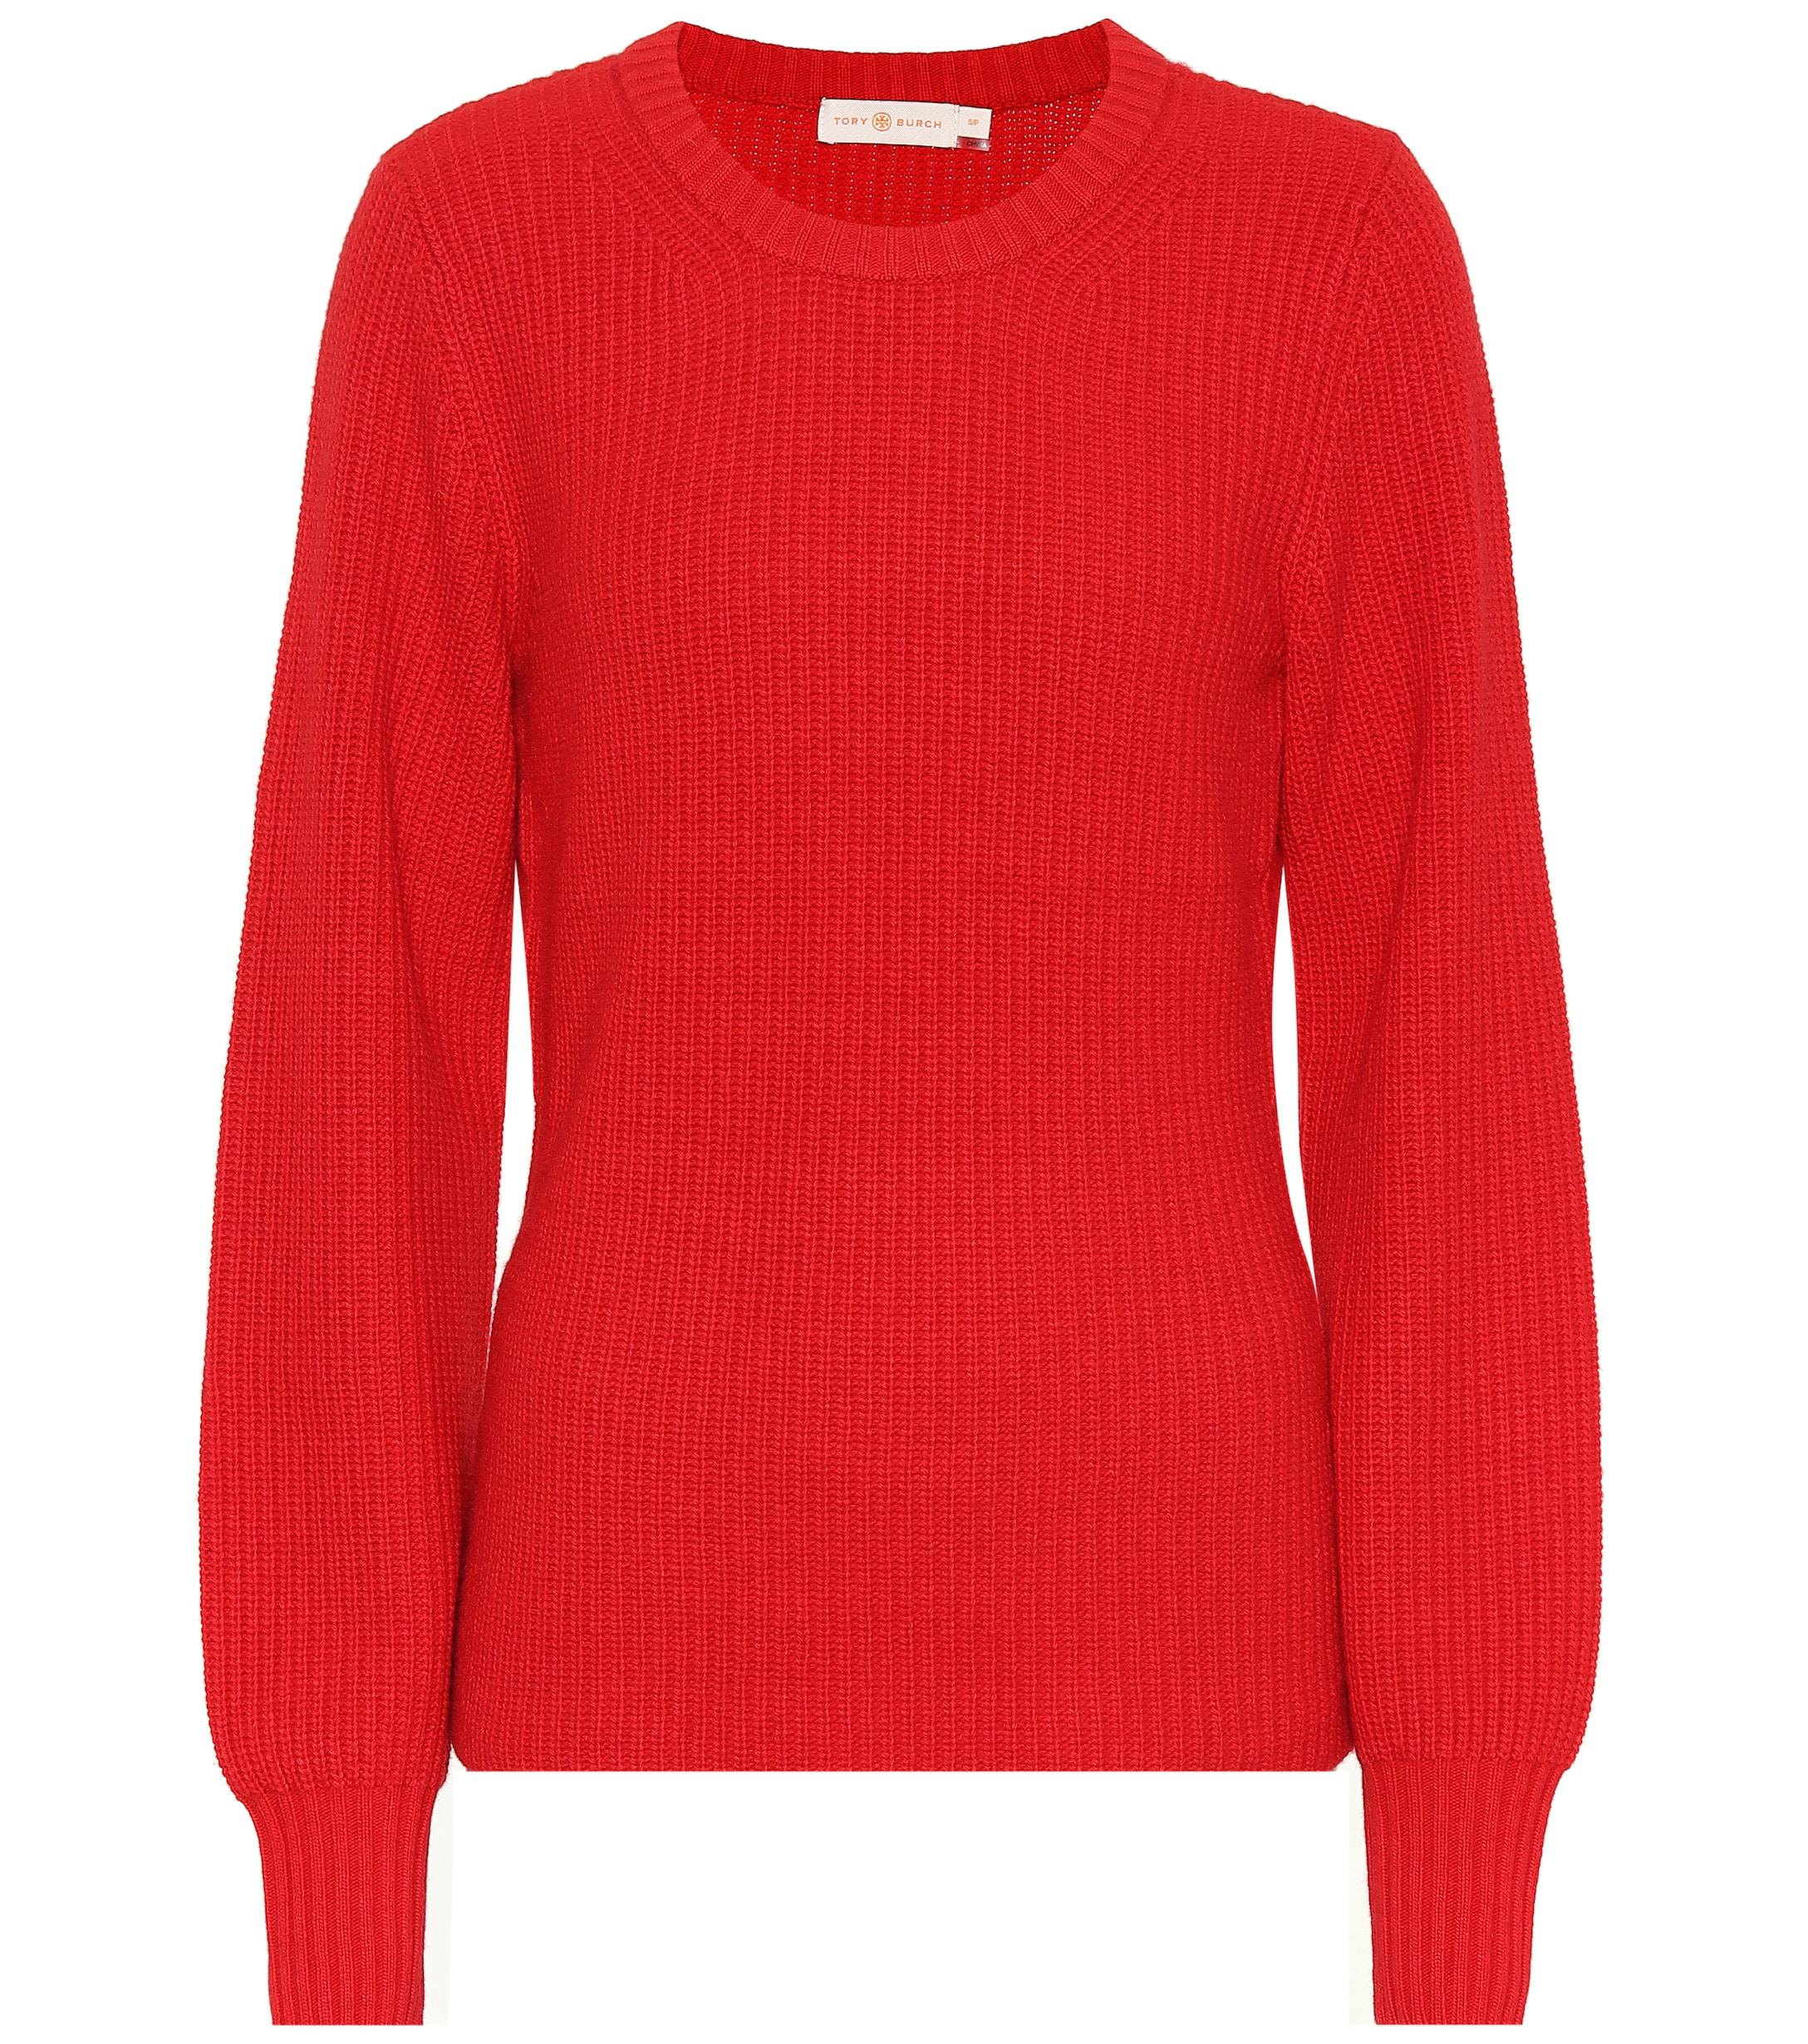 Tory Burch Wool And Cashmere-blend Sweater in Red - Lyst